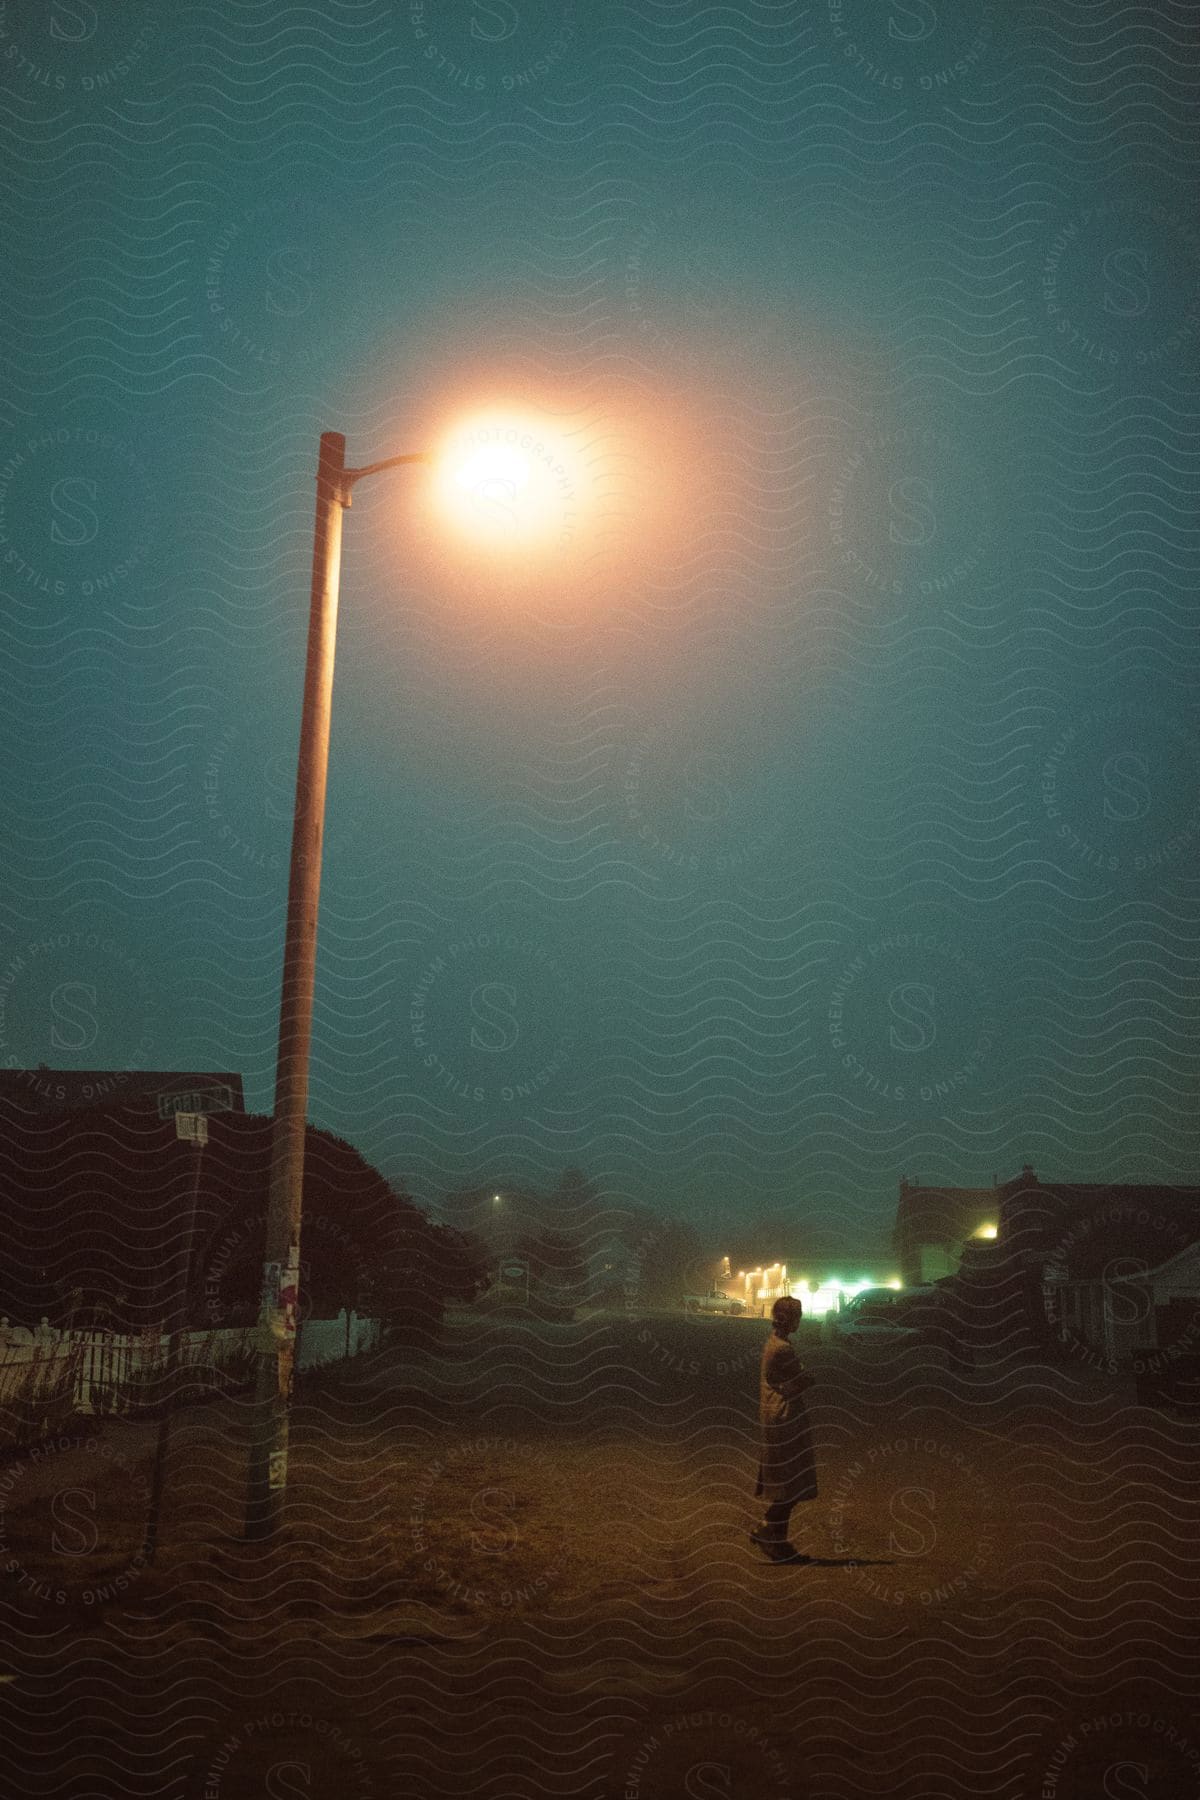 A person standing under a street light in a neighborhood with houses at night